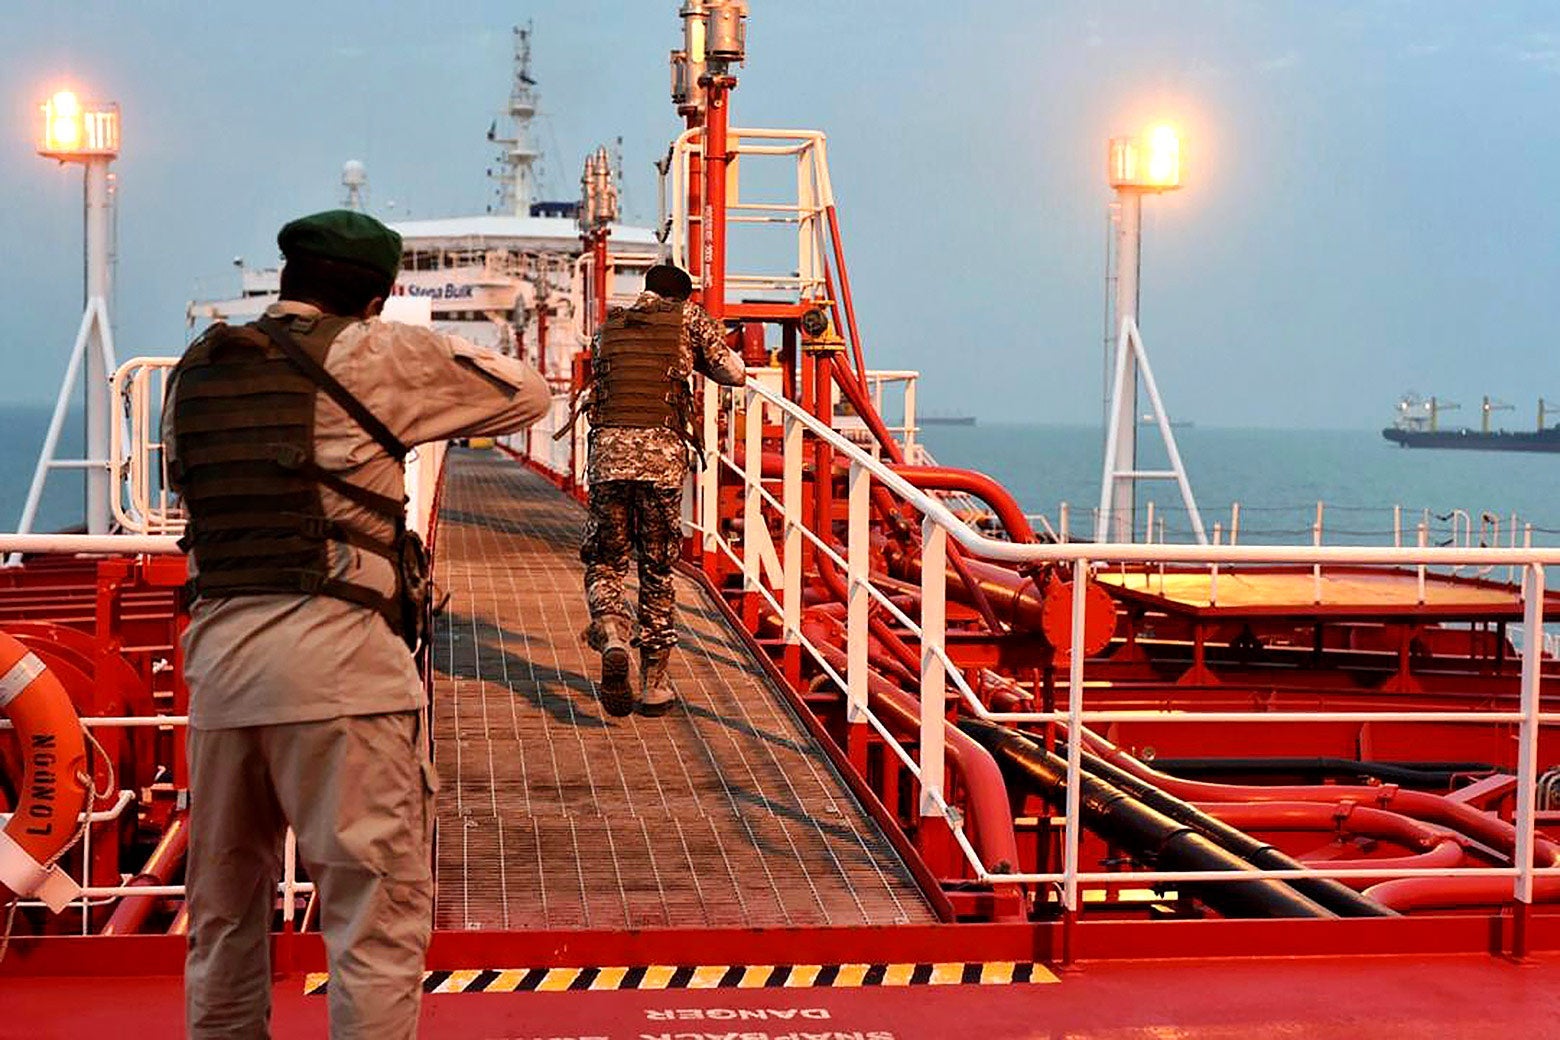 Two armed members of Iran’s Revolutionary Guard inspect the British-flagged oil tanker Stena Impero.